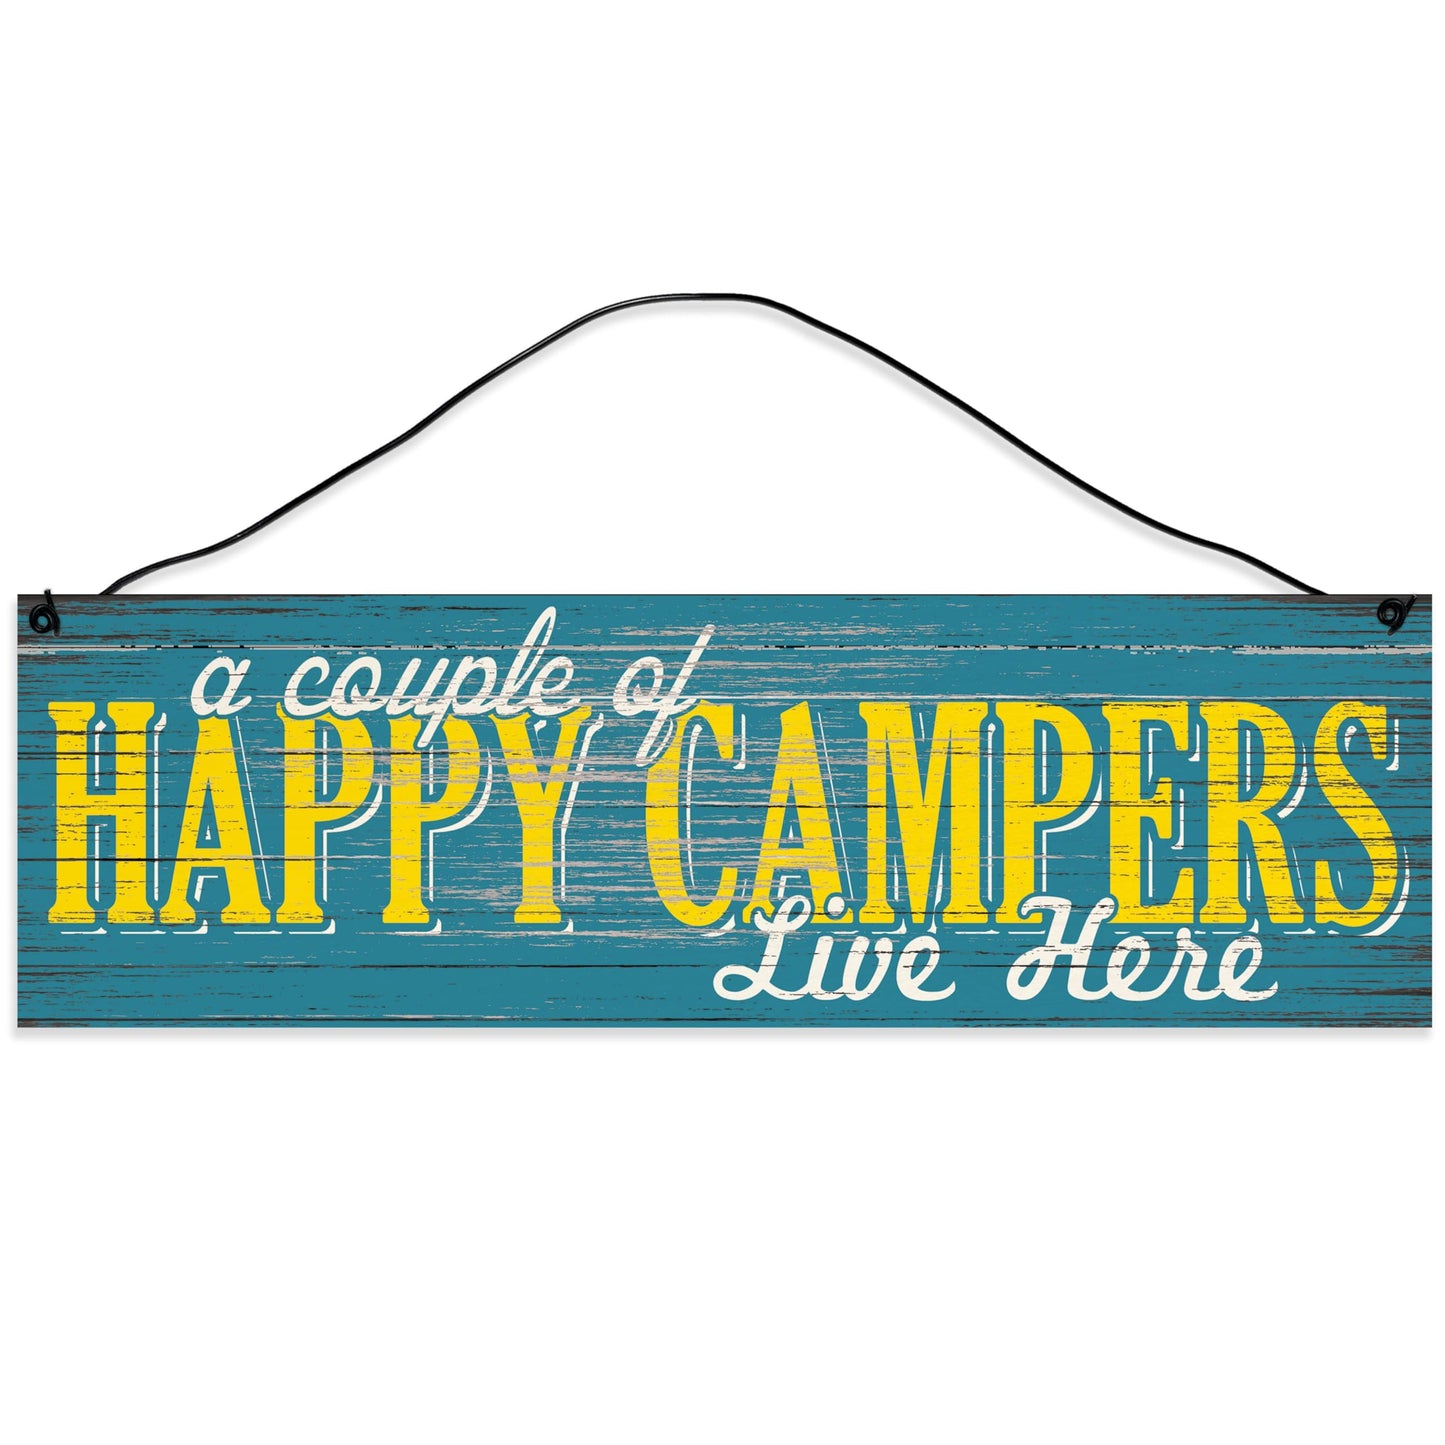 Couple of Happy Campers | Lodge Decor | Anniversary Gift | Handmade | Wood Sign | Wire Hanger/Stand | Camping Decor | Cabin Decor | Solid Maple